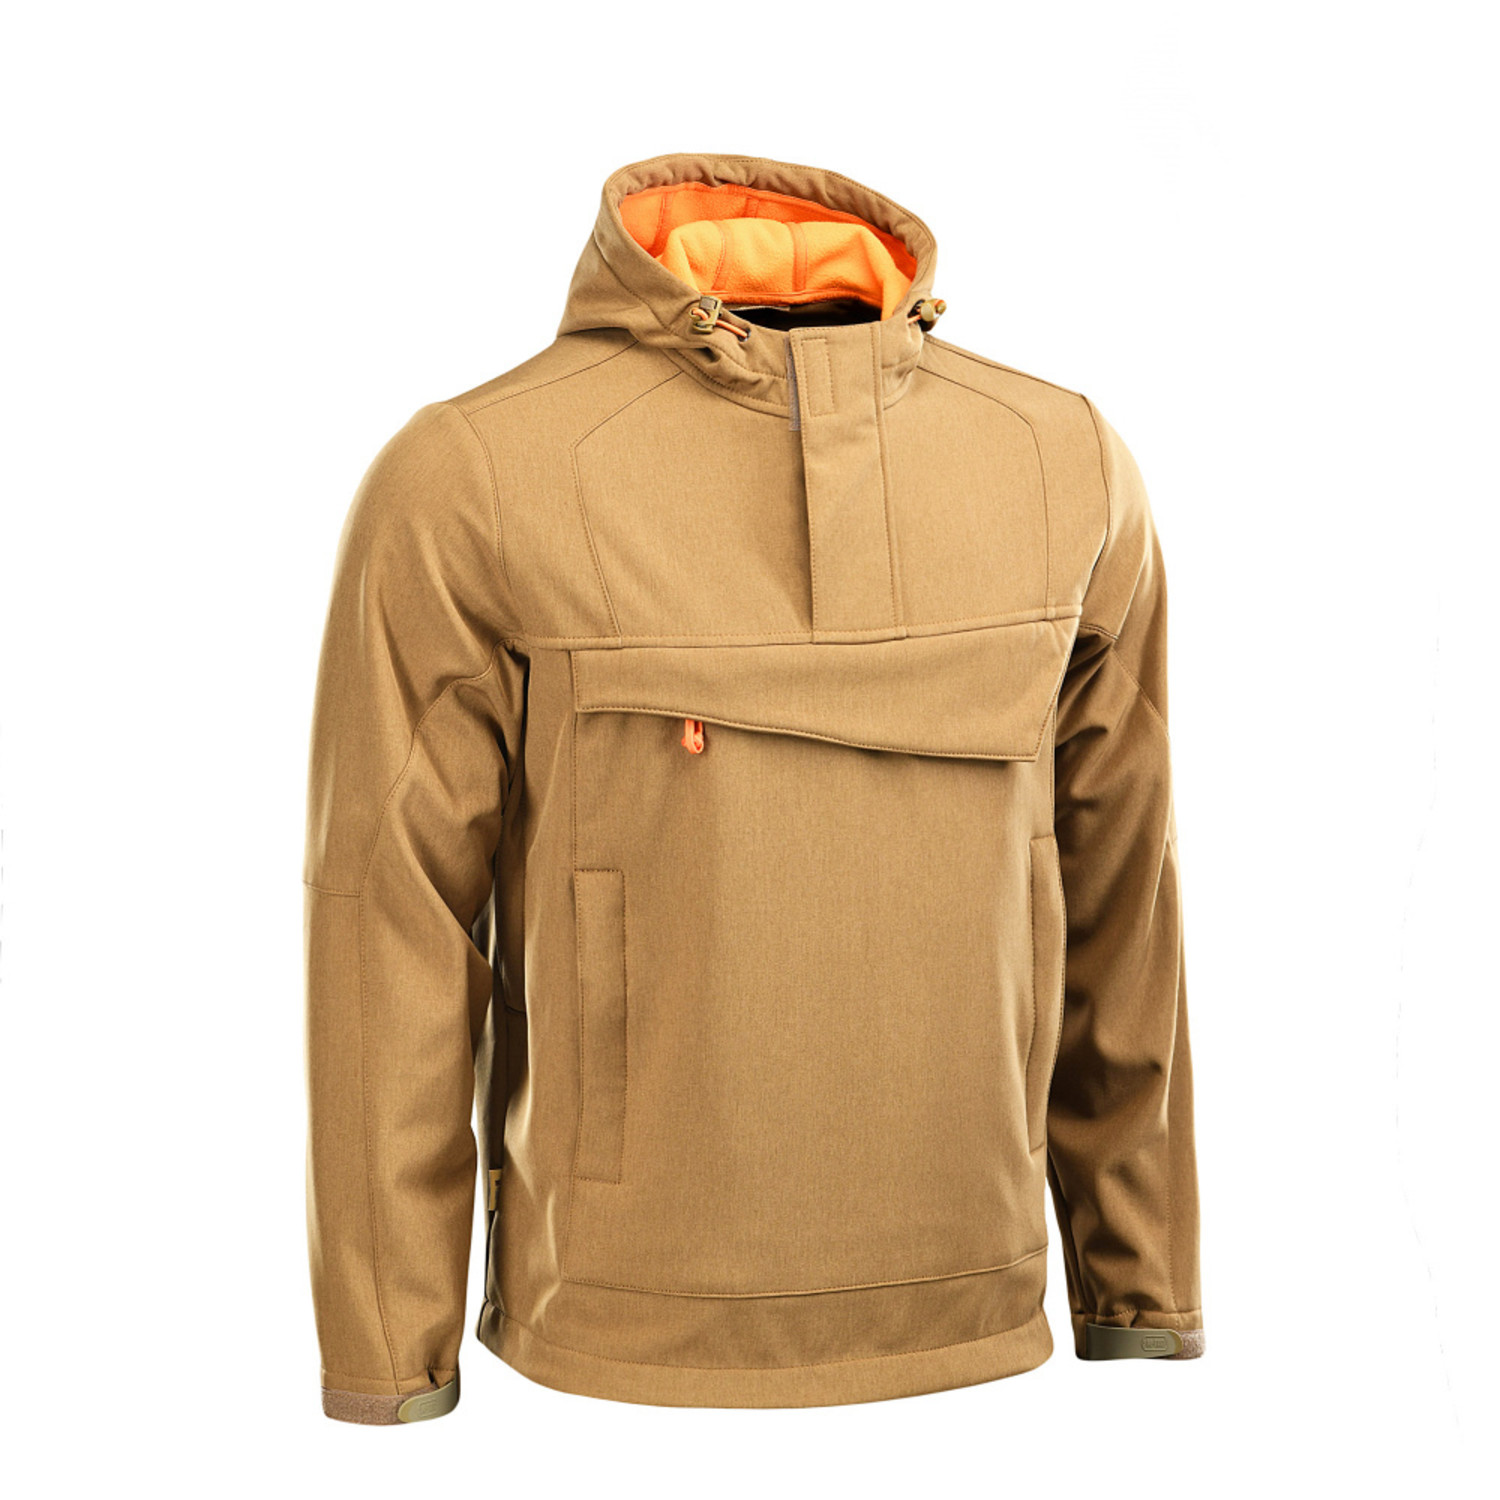 Anorak // Coyote + Orange (2XL) - M-Tac - Touch of Modern